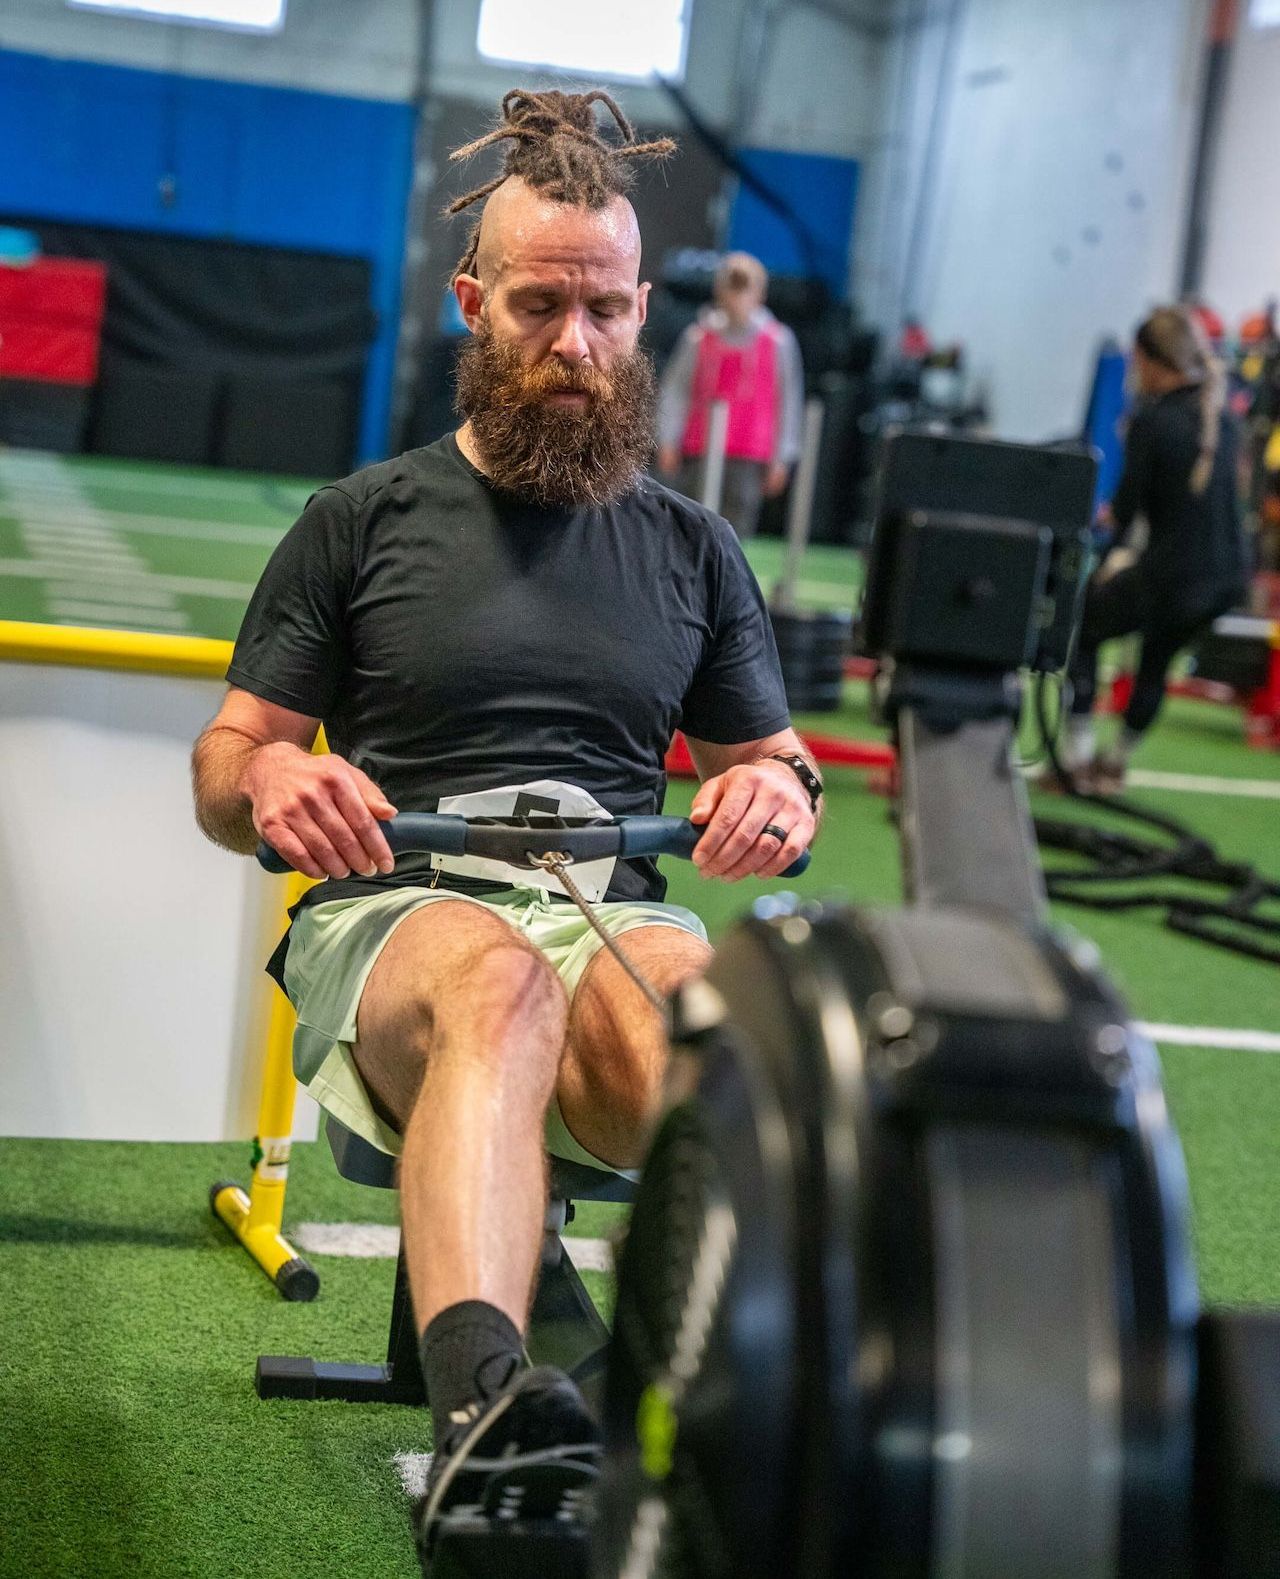 A man with a beard is rowing a machine during a HYROX Conditioning Class at Olympia Performance gym in Montreal